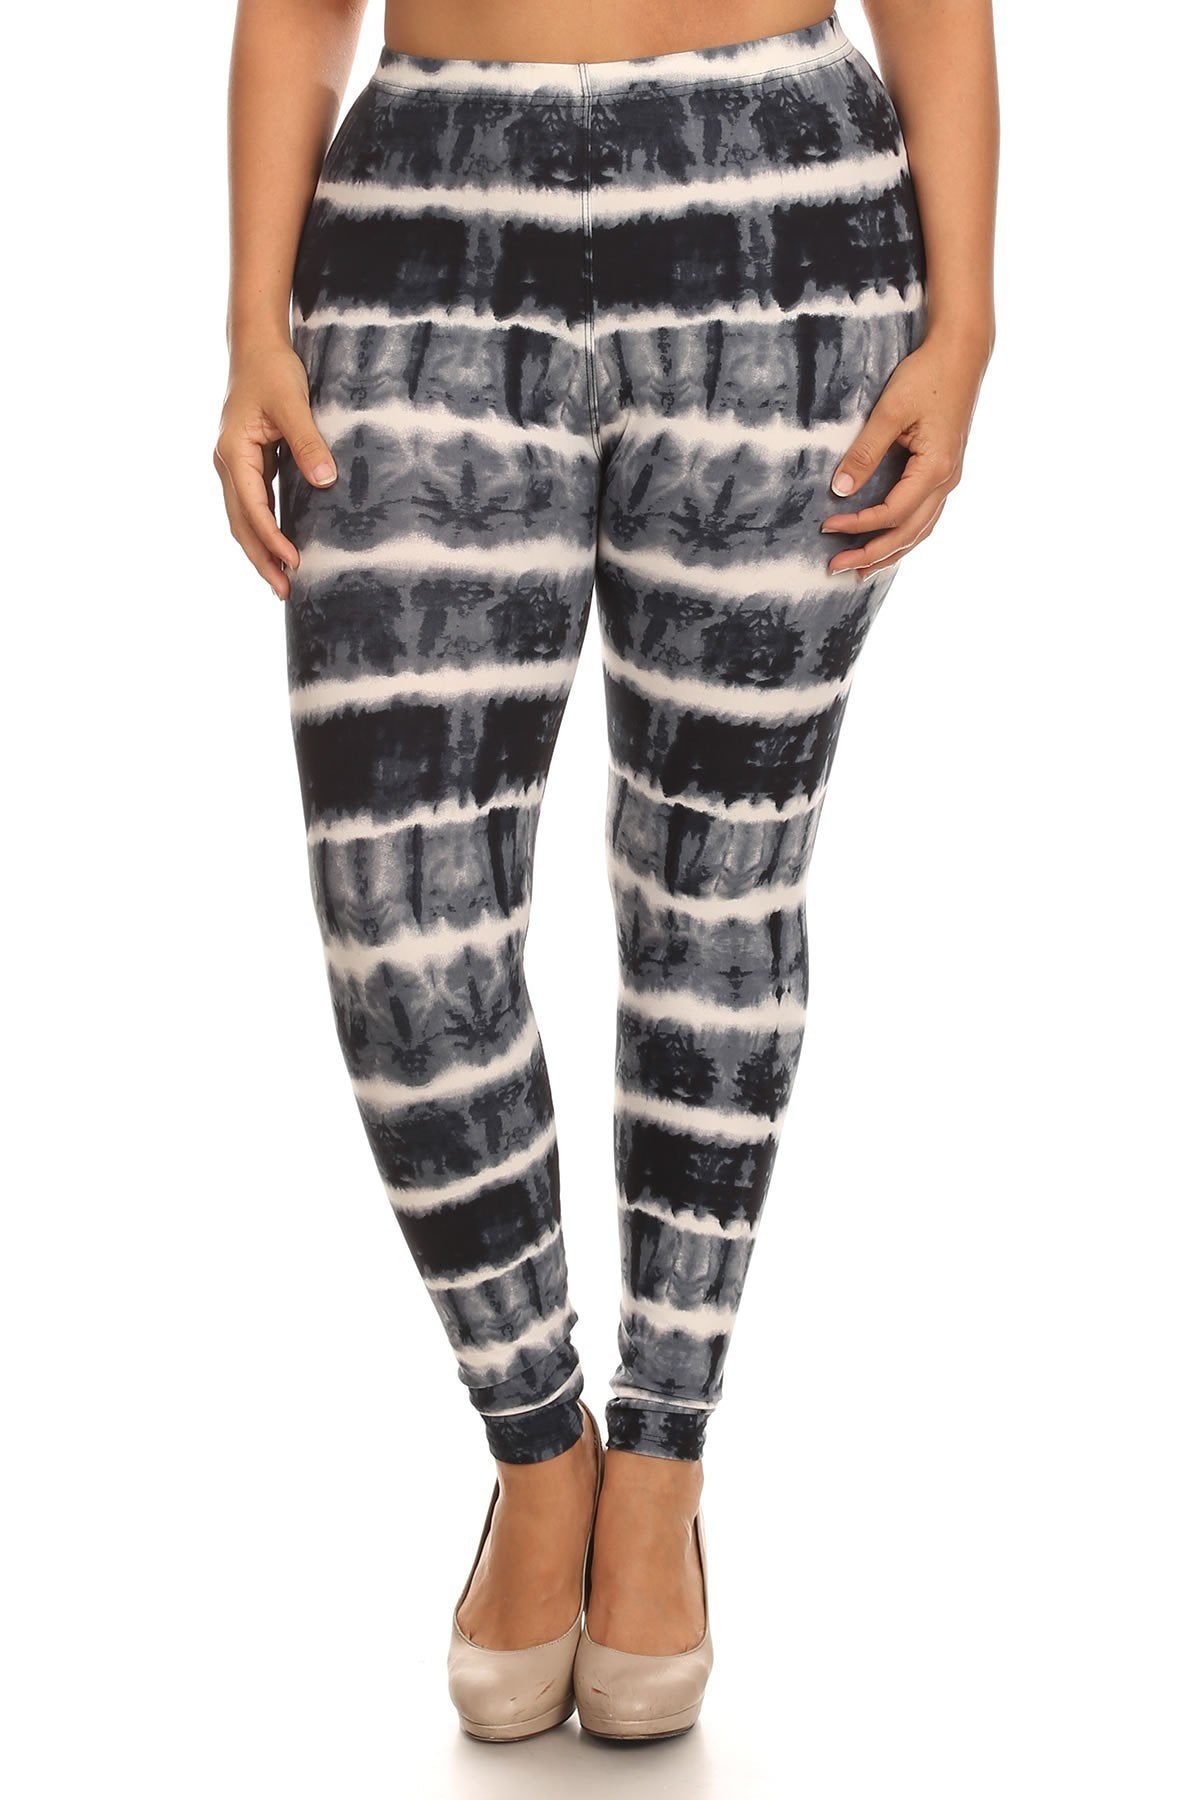 Plus Size Tie Dye Print, Full Length Leggings In A Fitted Style With A Banded High Waist Women's Clothing jehouze 